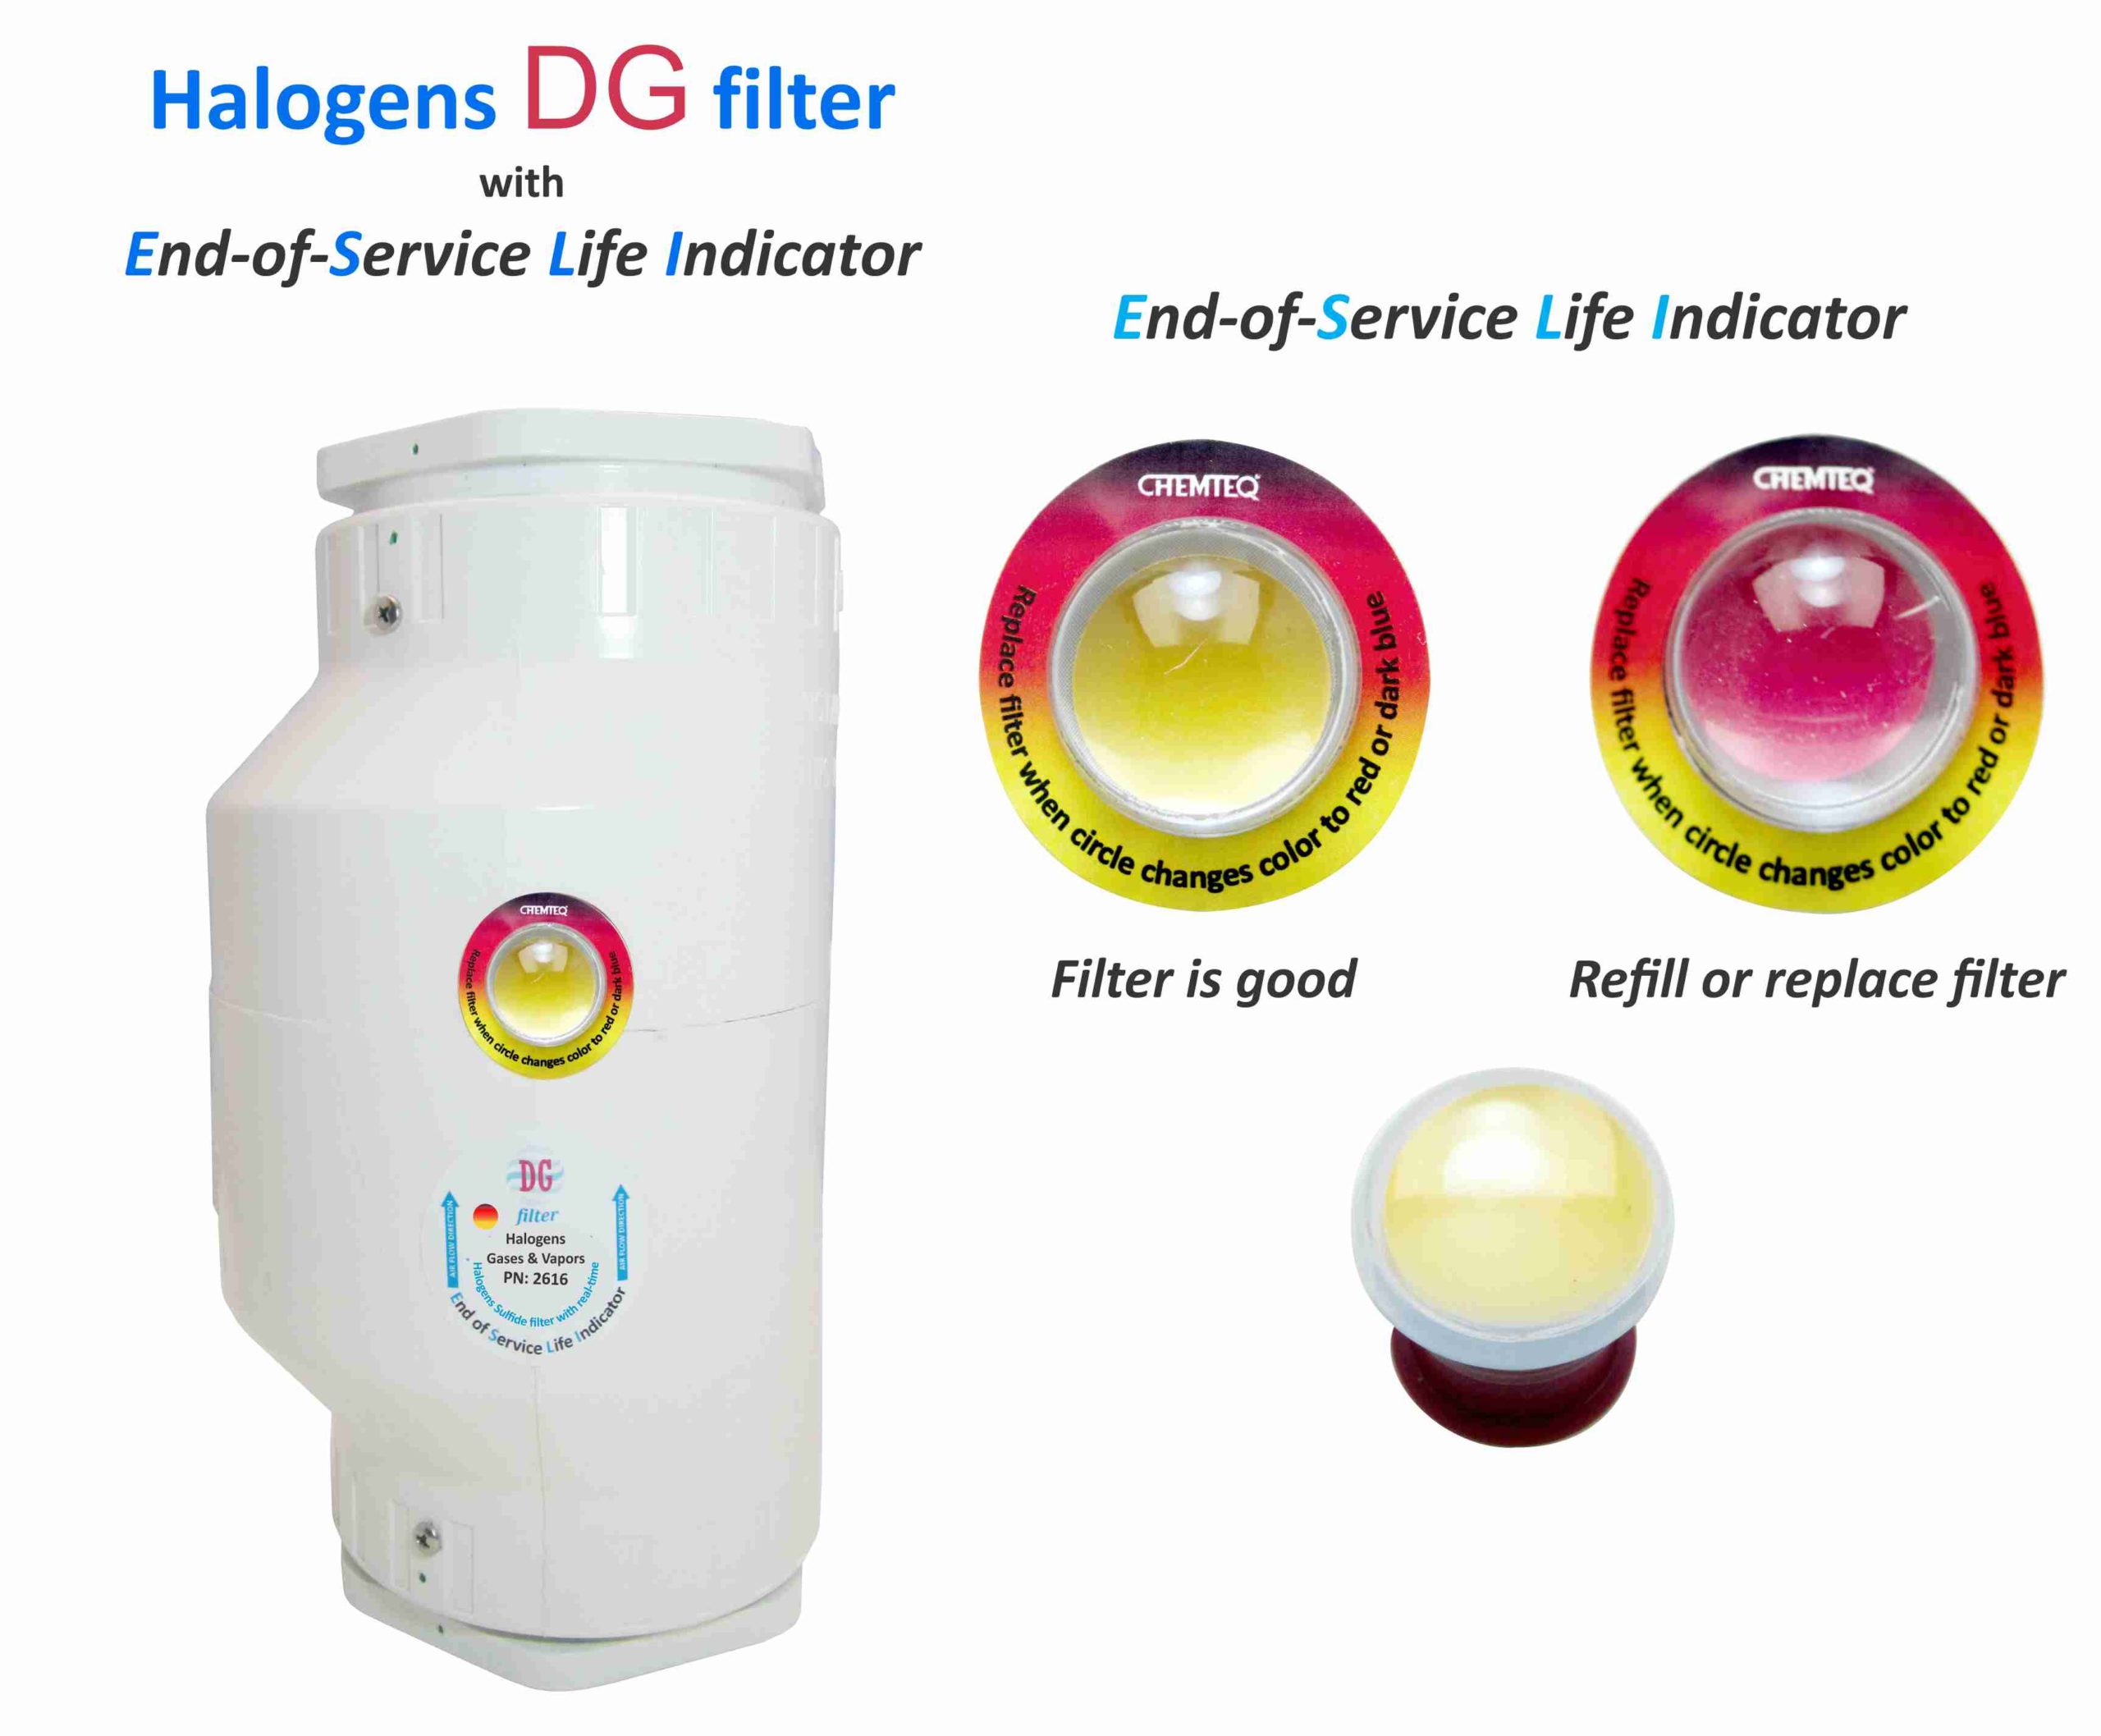 Halogens DG FILTER-ESLI-2616. Filter with end of service life indicator for chemical processes and reactor vents.